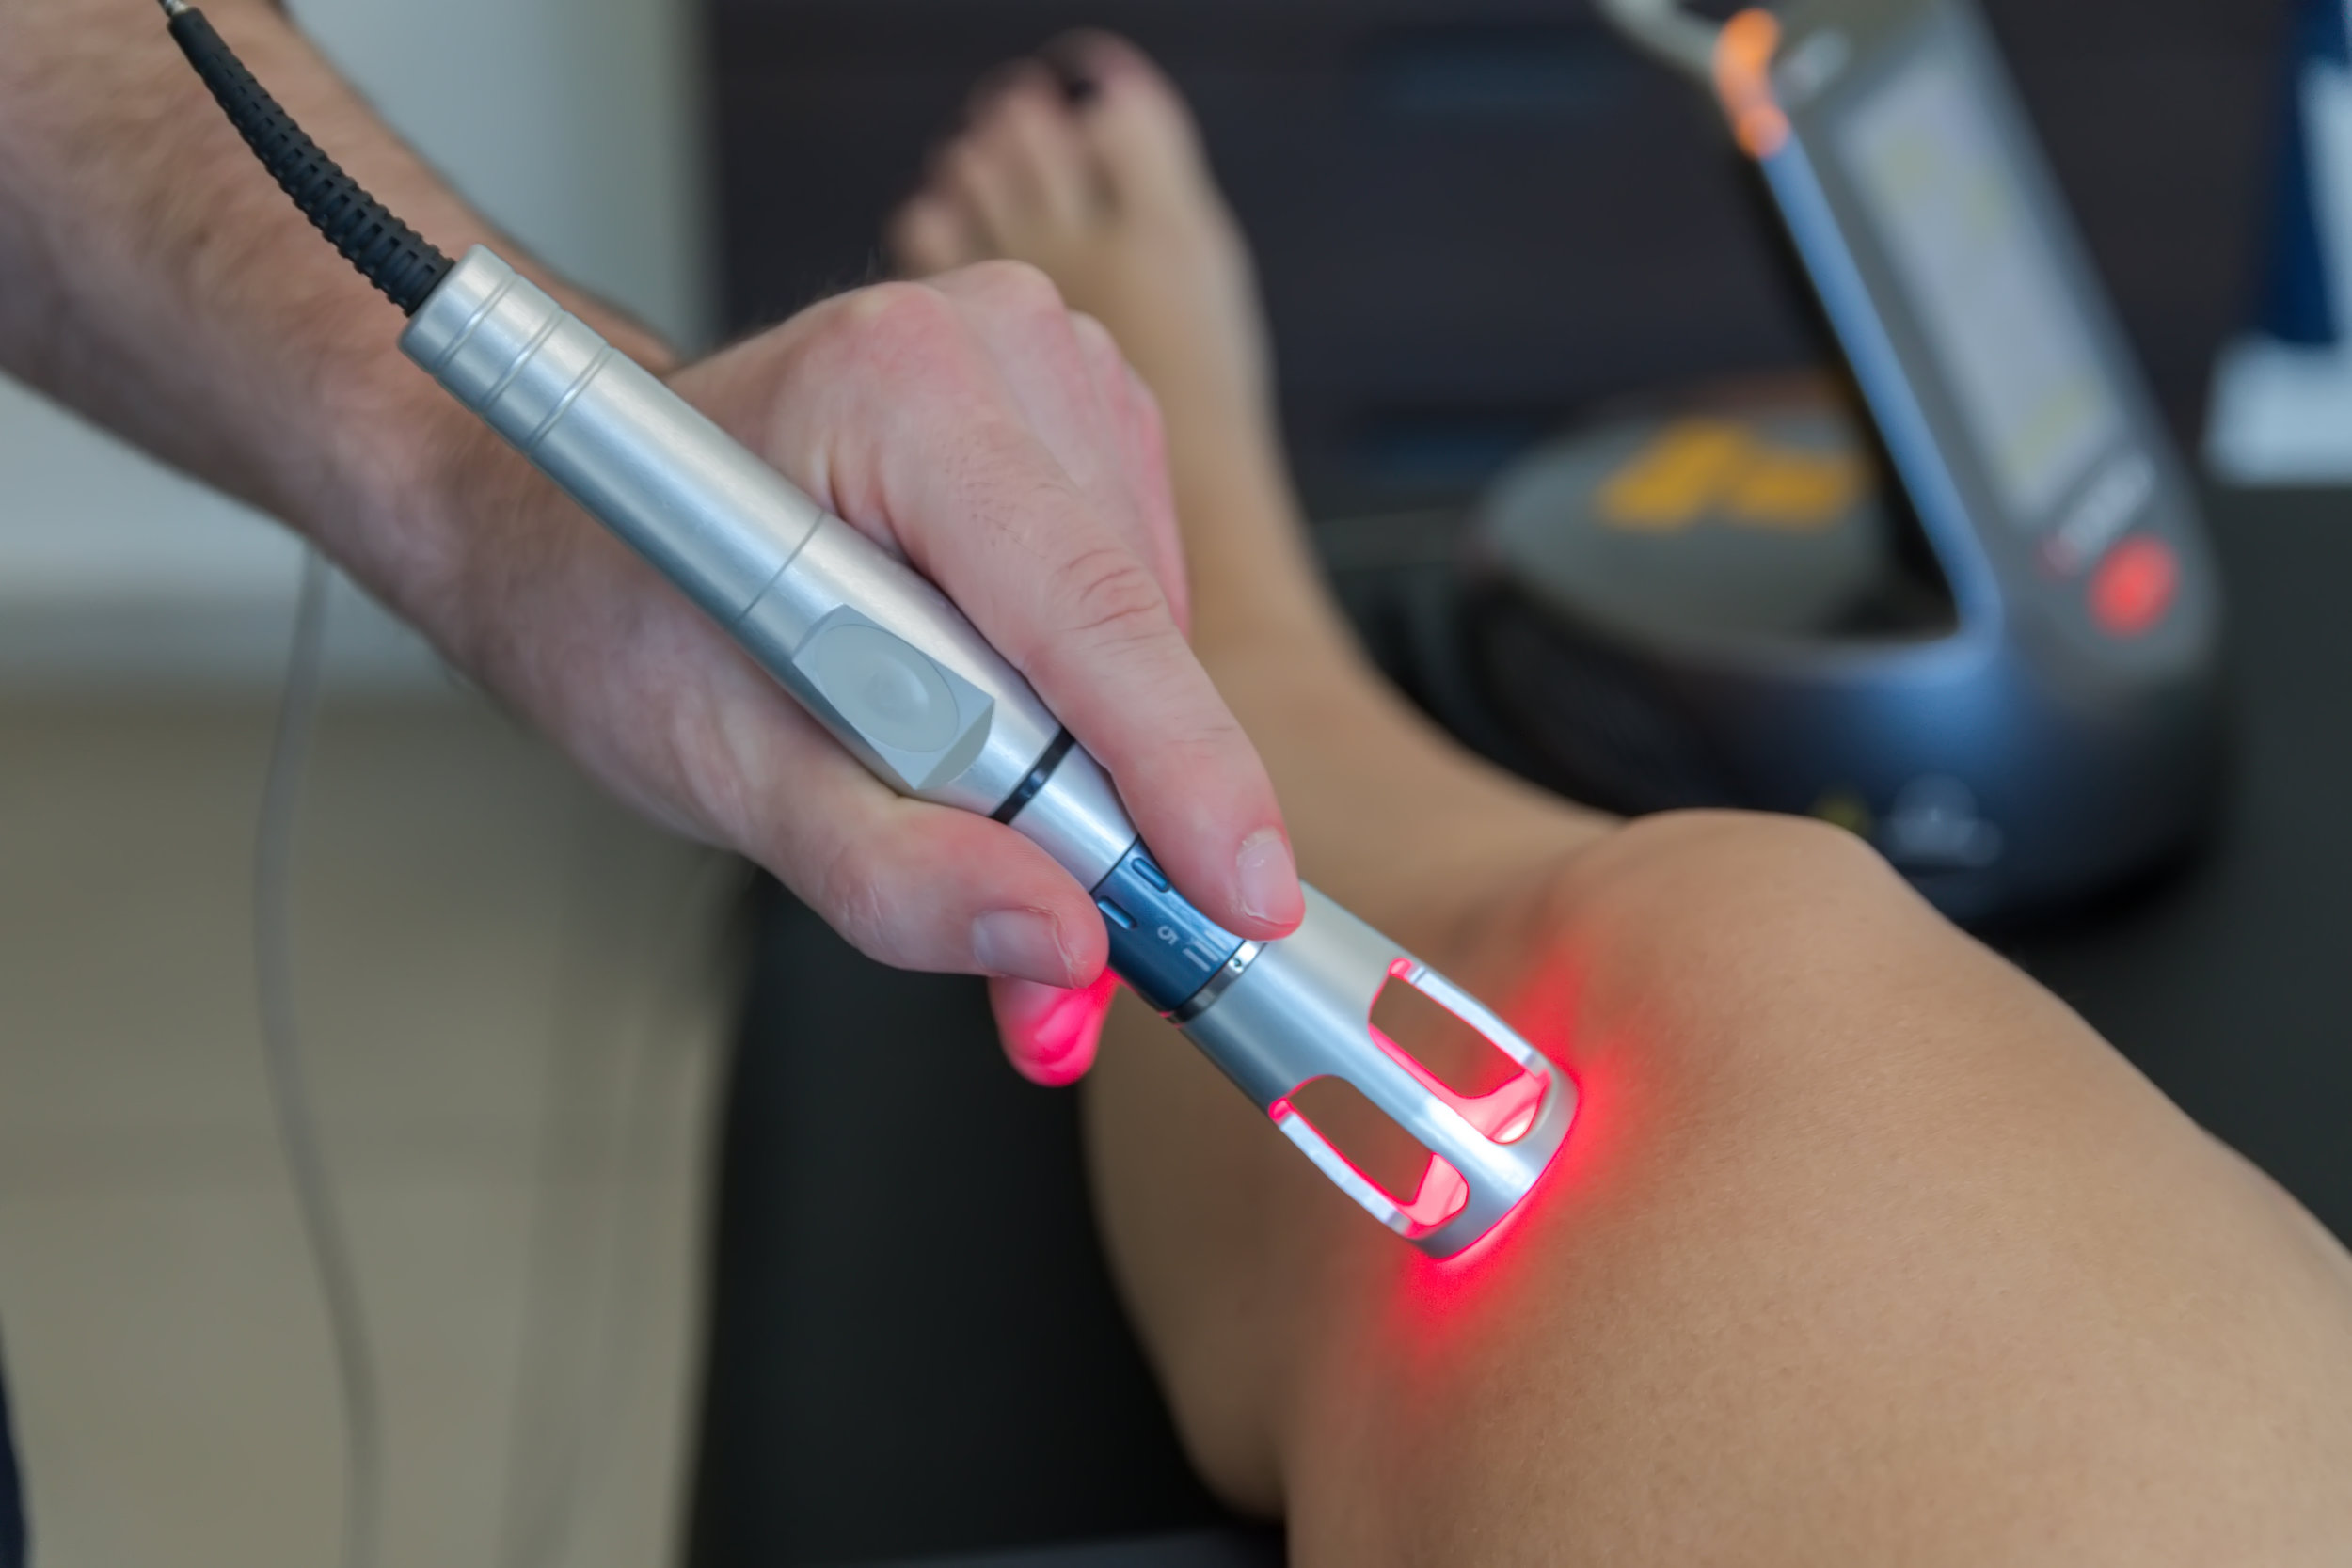 3cb Performance — Low level laser therapy (LLLT) aka cold laser therapy Is it effective and is